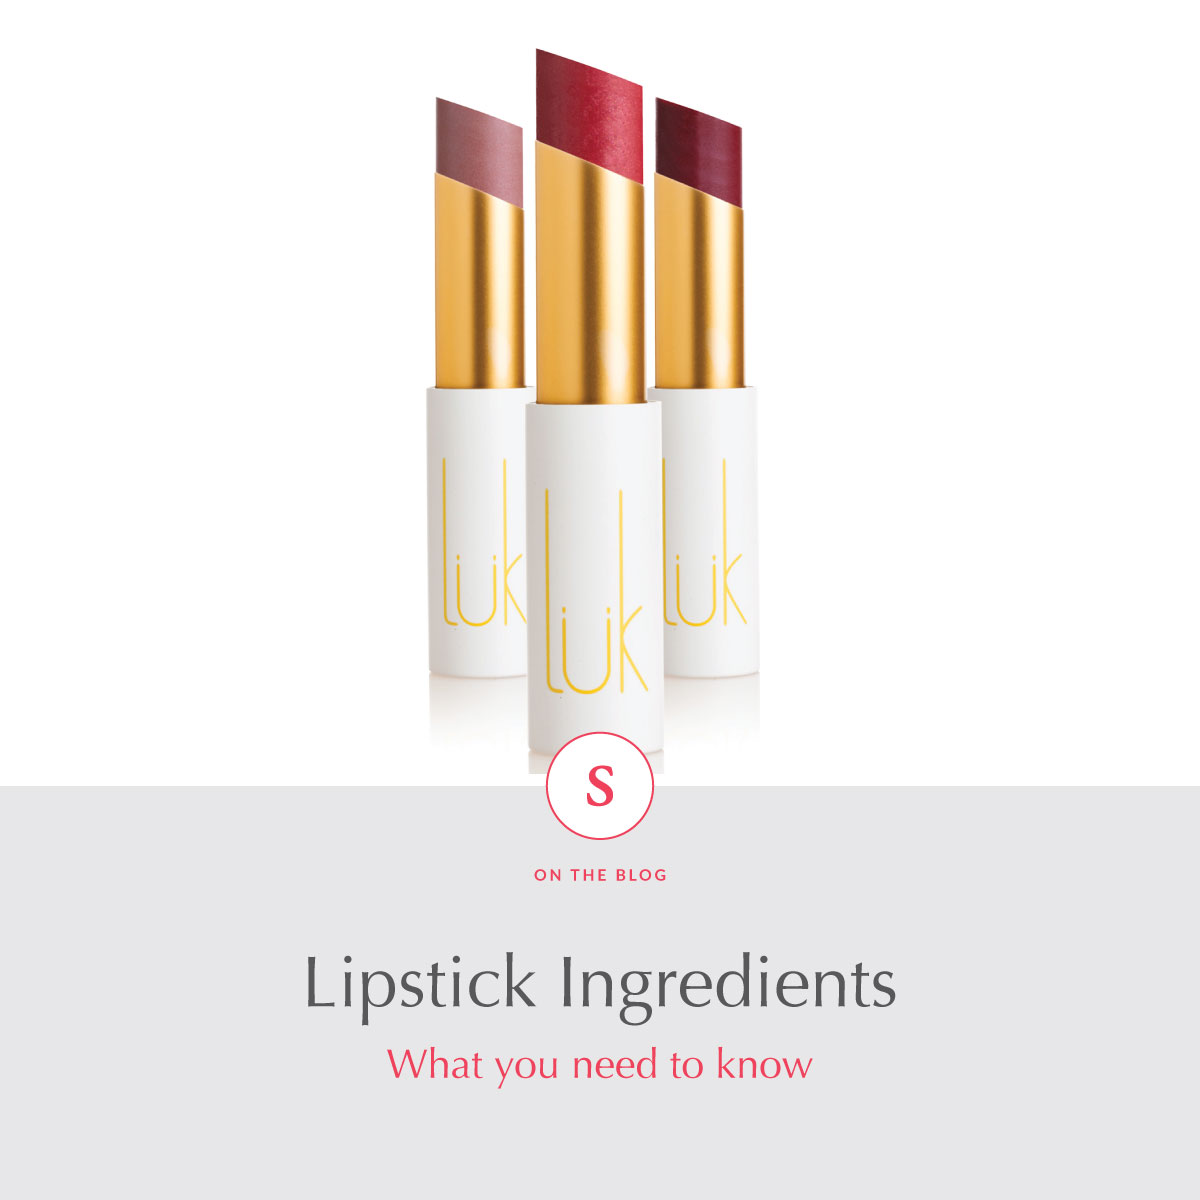 What you need to know about ingredients in lipsticks